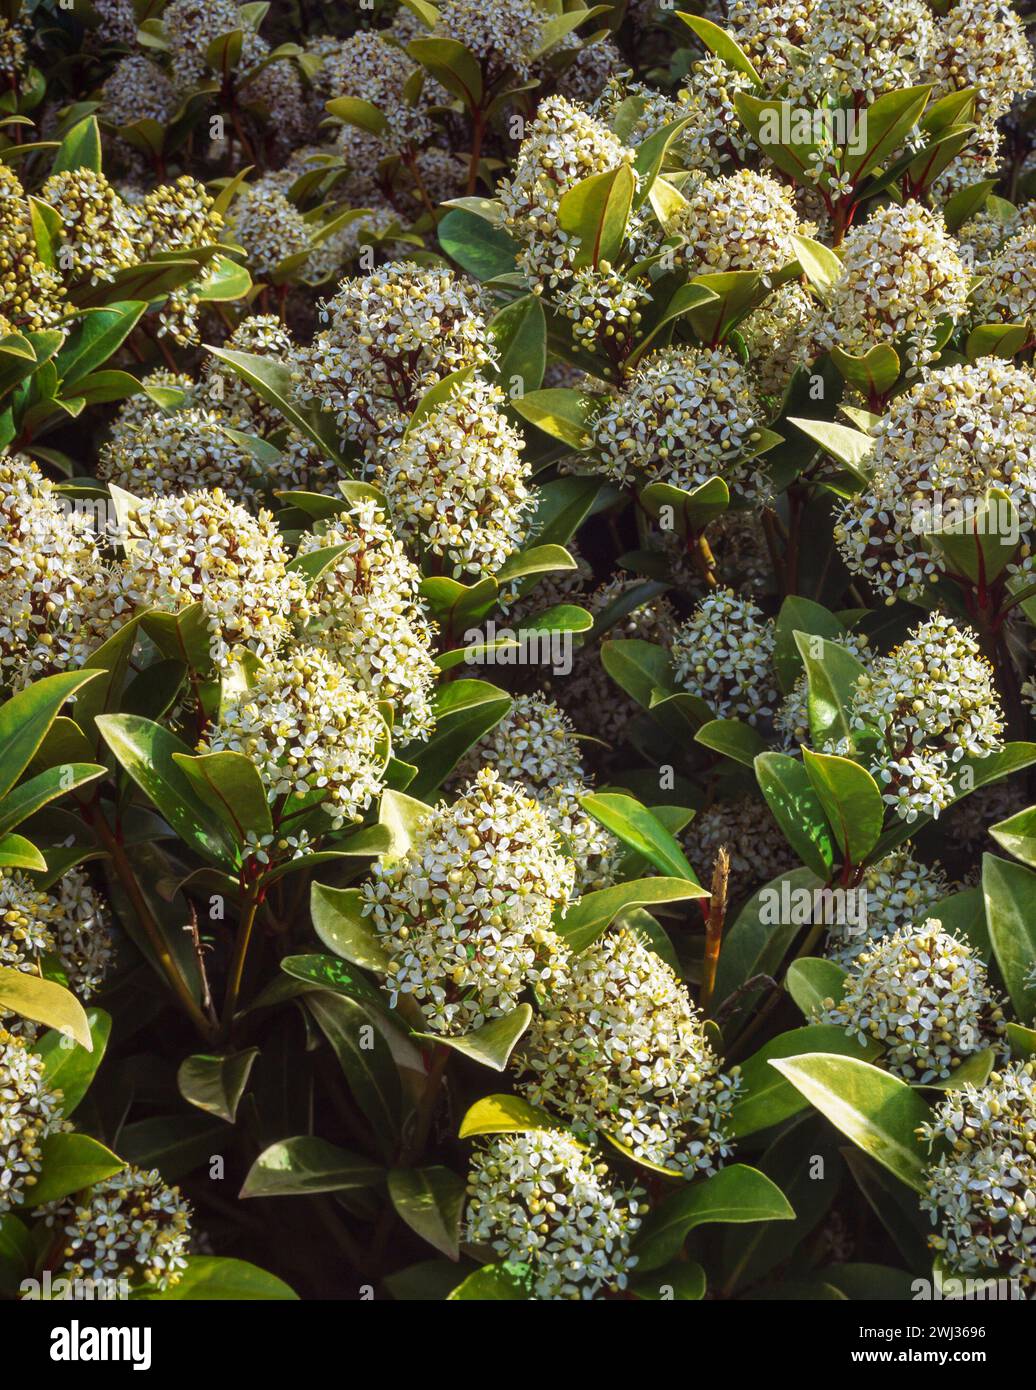 Skimmia Japonica 'Rockyfield Green' with evergreen leaves and white blossom growing in English garden, England, UK Stock Photo